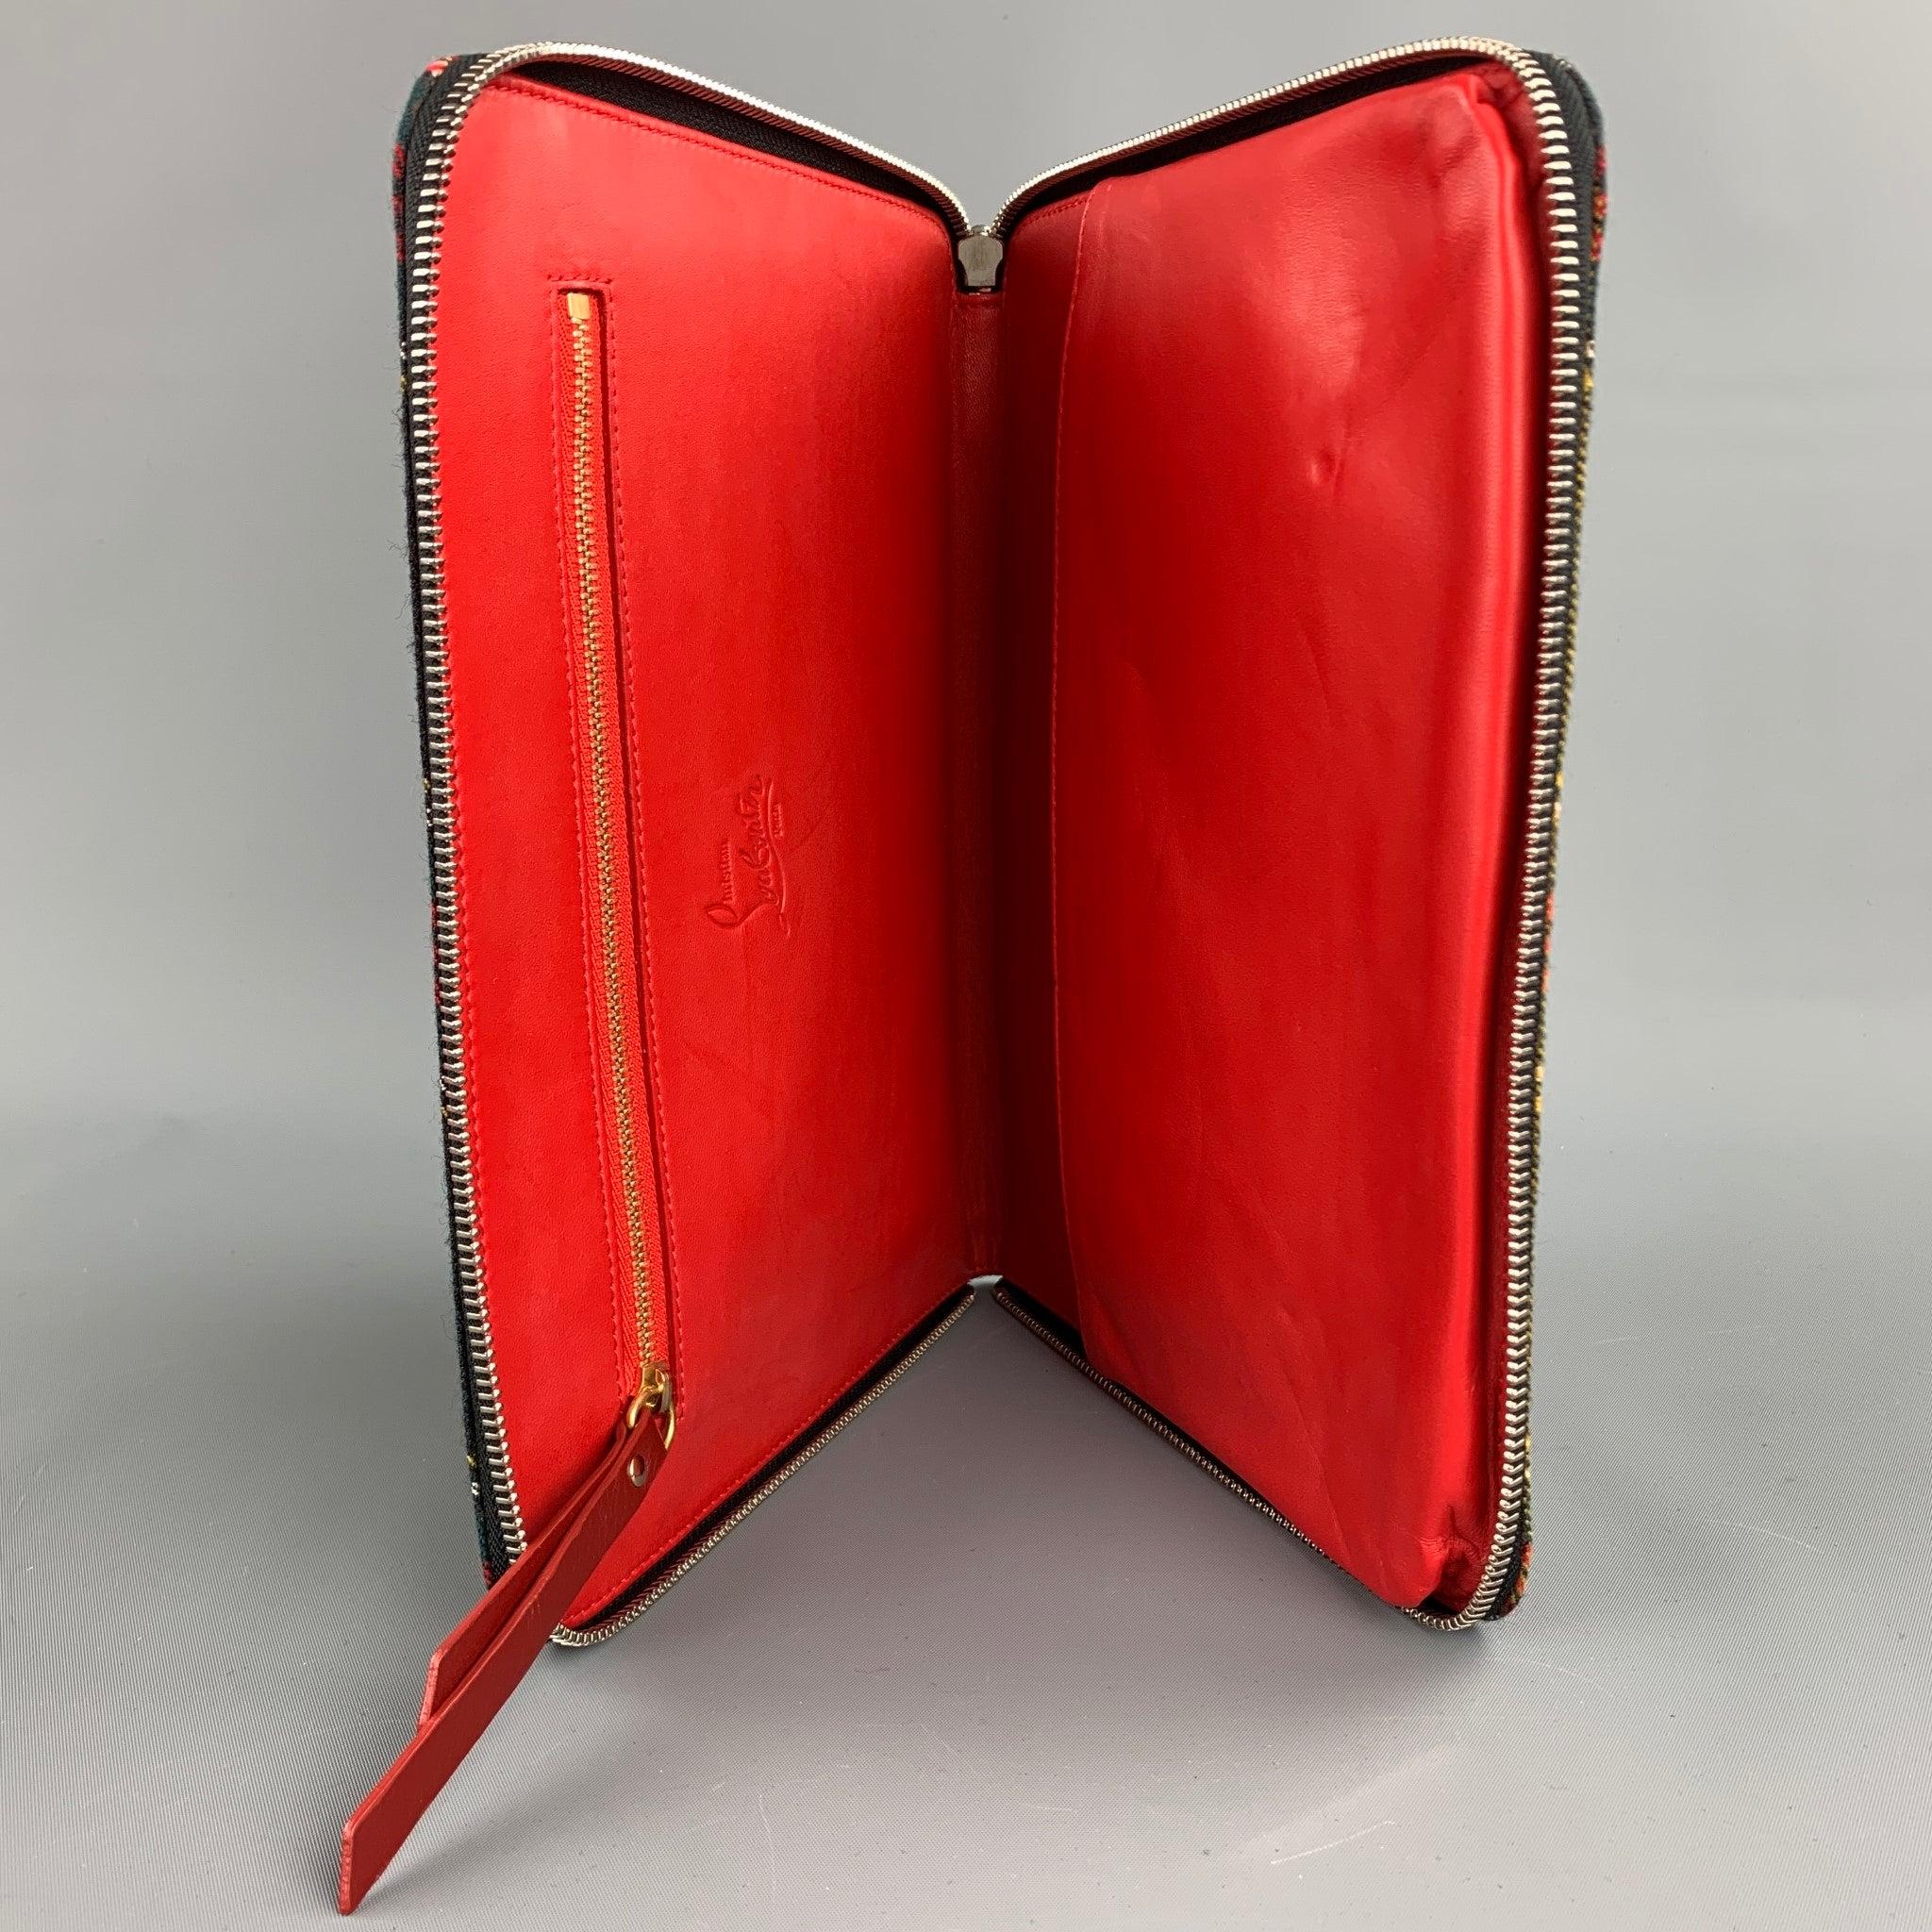 CHRISTIAN LOUBOUTIN iPad Case comes in a black & red plaid canvas with all over spike details featuring a leather strap, inner pocket, and a zip up closure. Fits a regular iPad.Very Good
Pre-Owned Condition. 

Measurements: 
  Length: 8 inches 